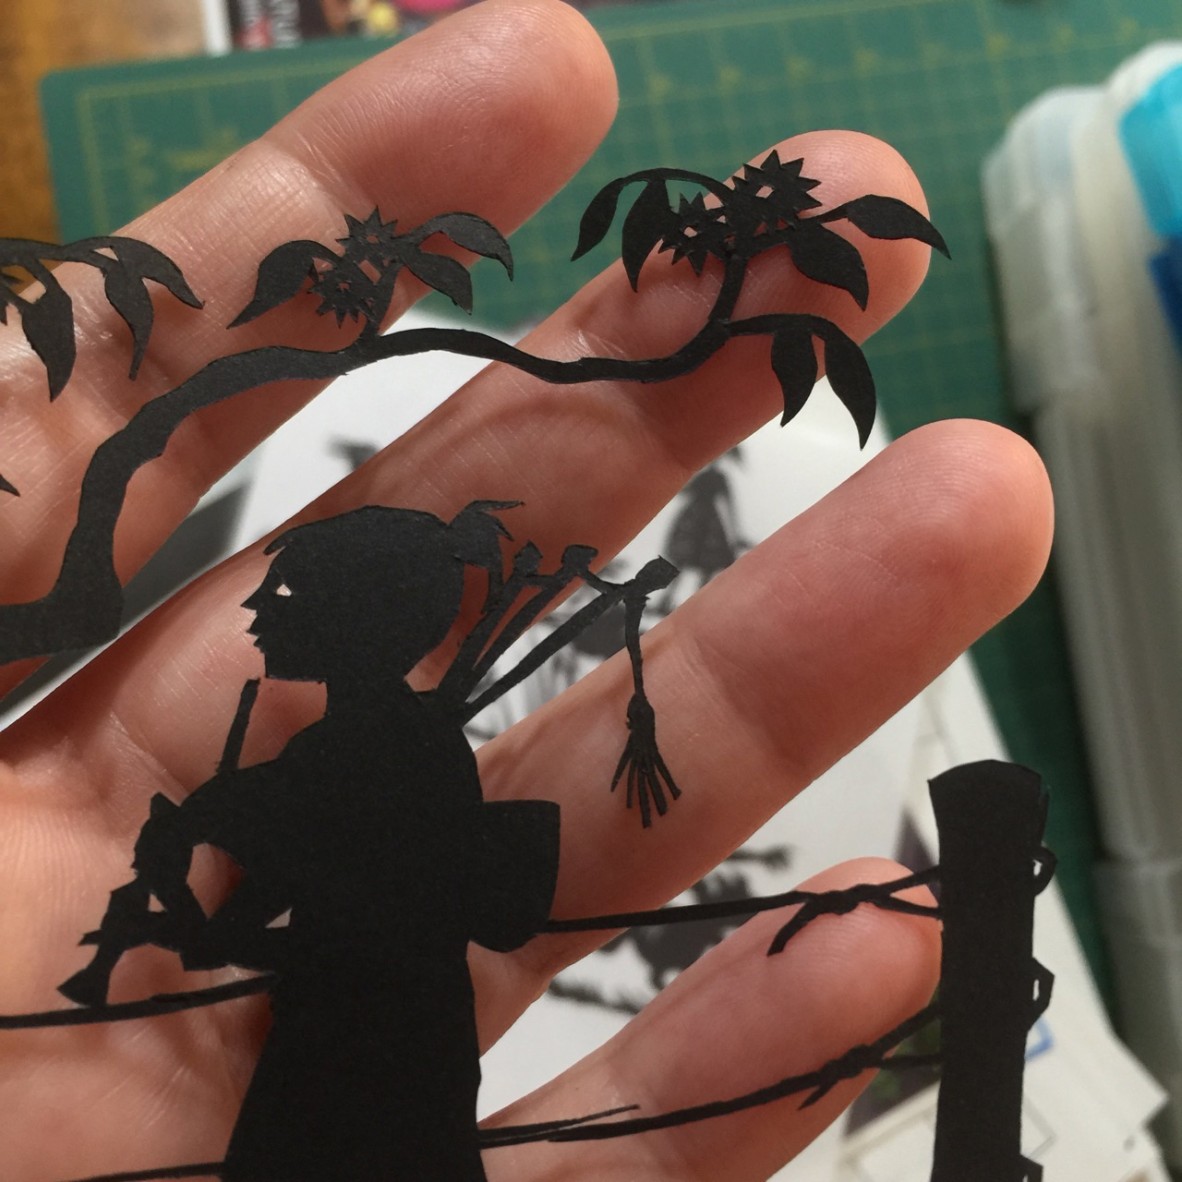 A hand holding a black paper cut-out of a figure playing bagpipes